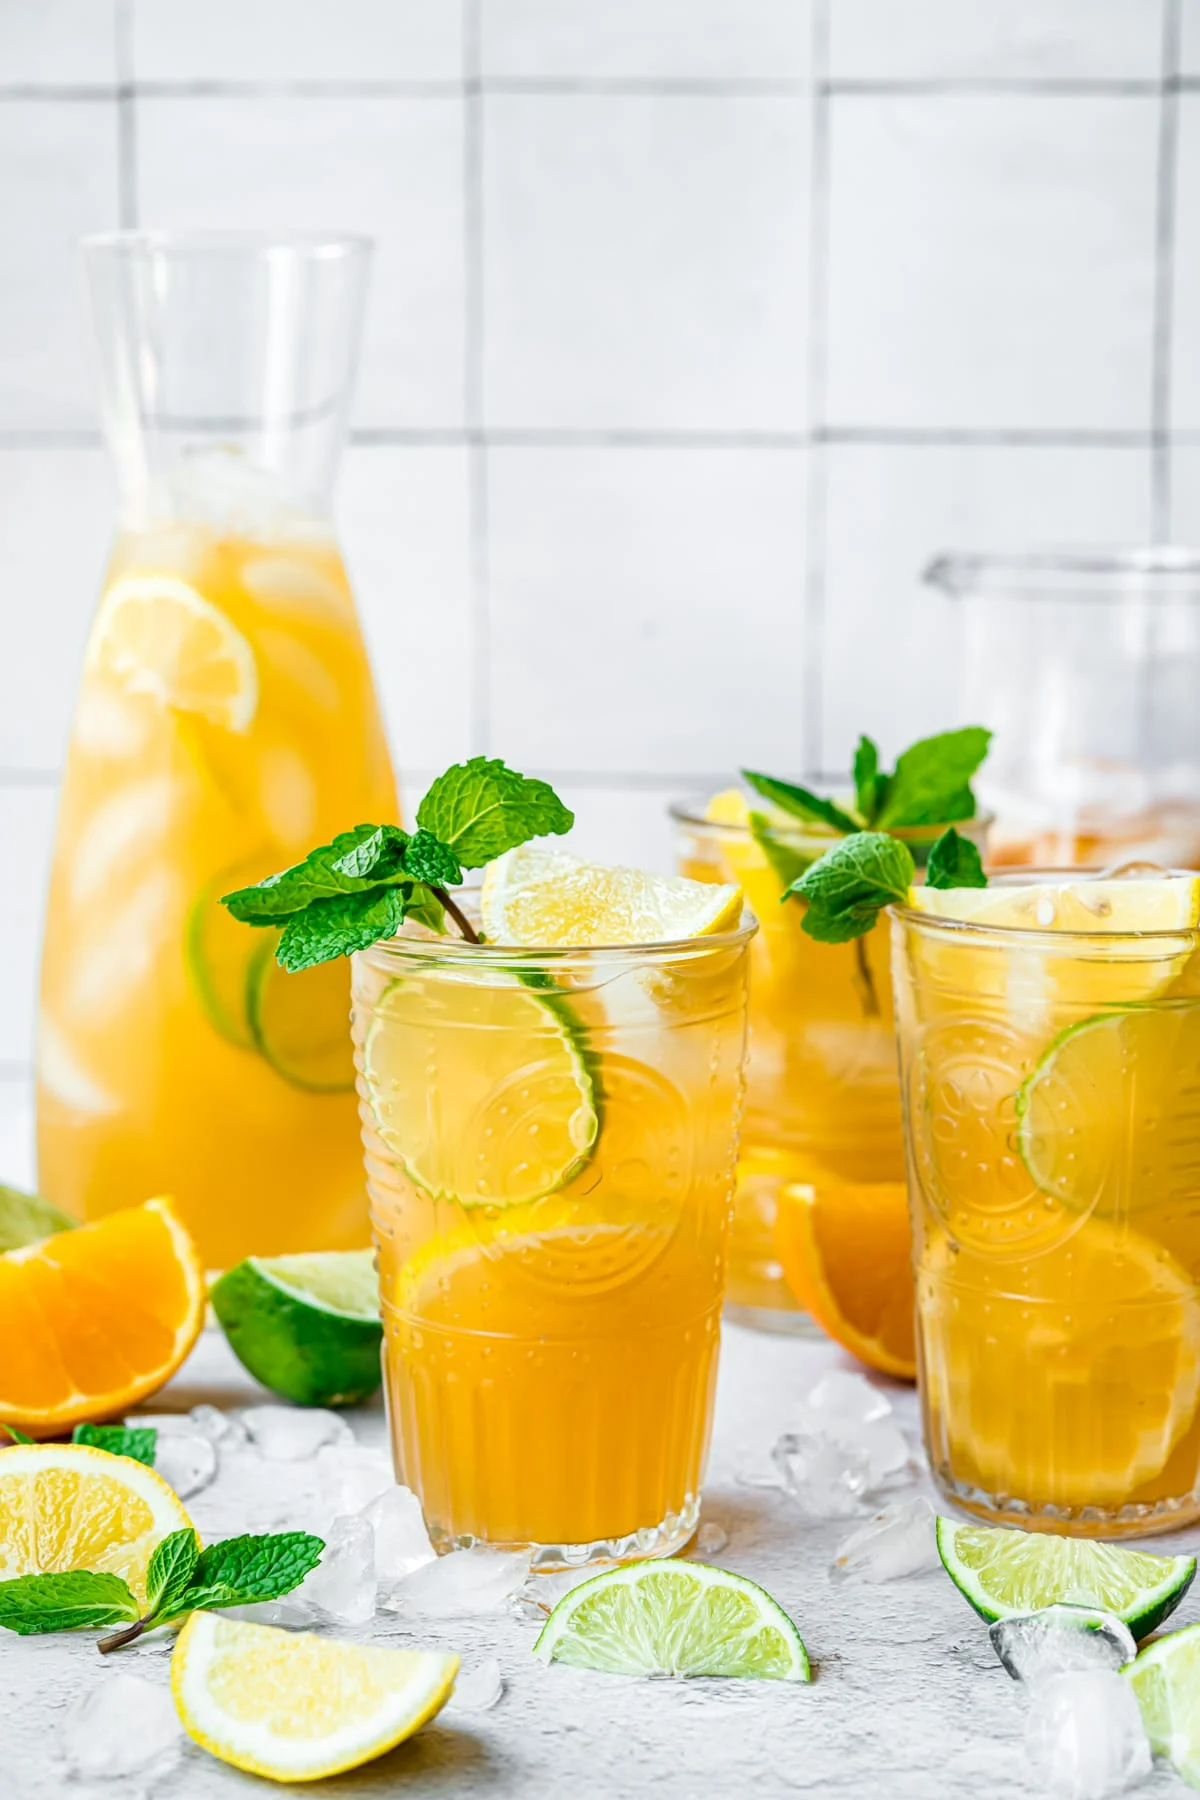 brew your own refreshing iced tea